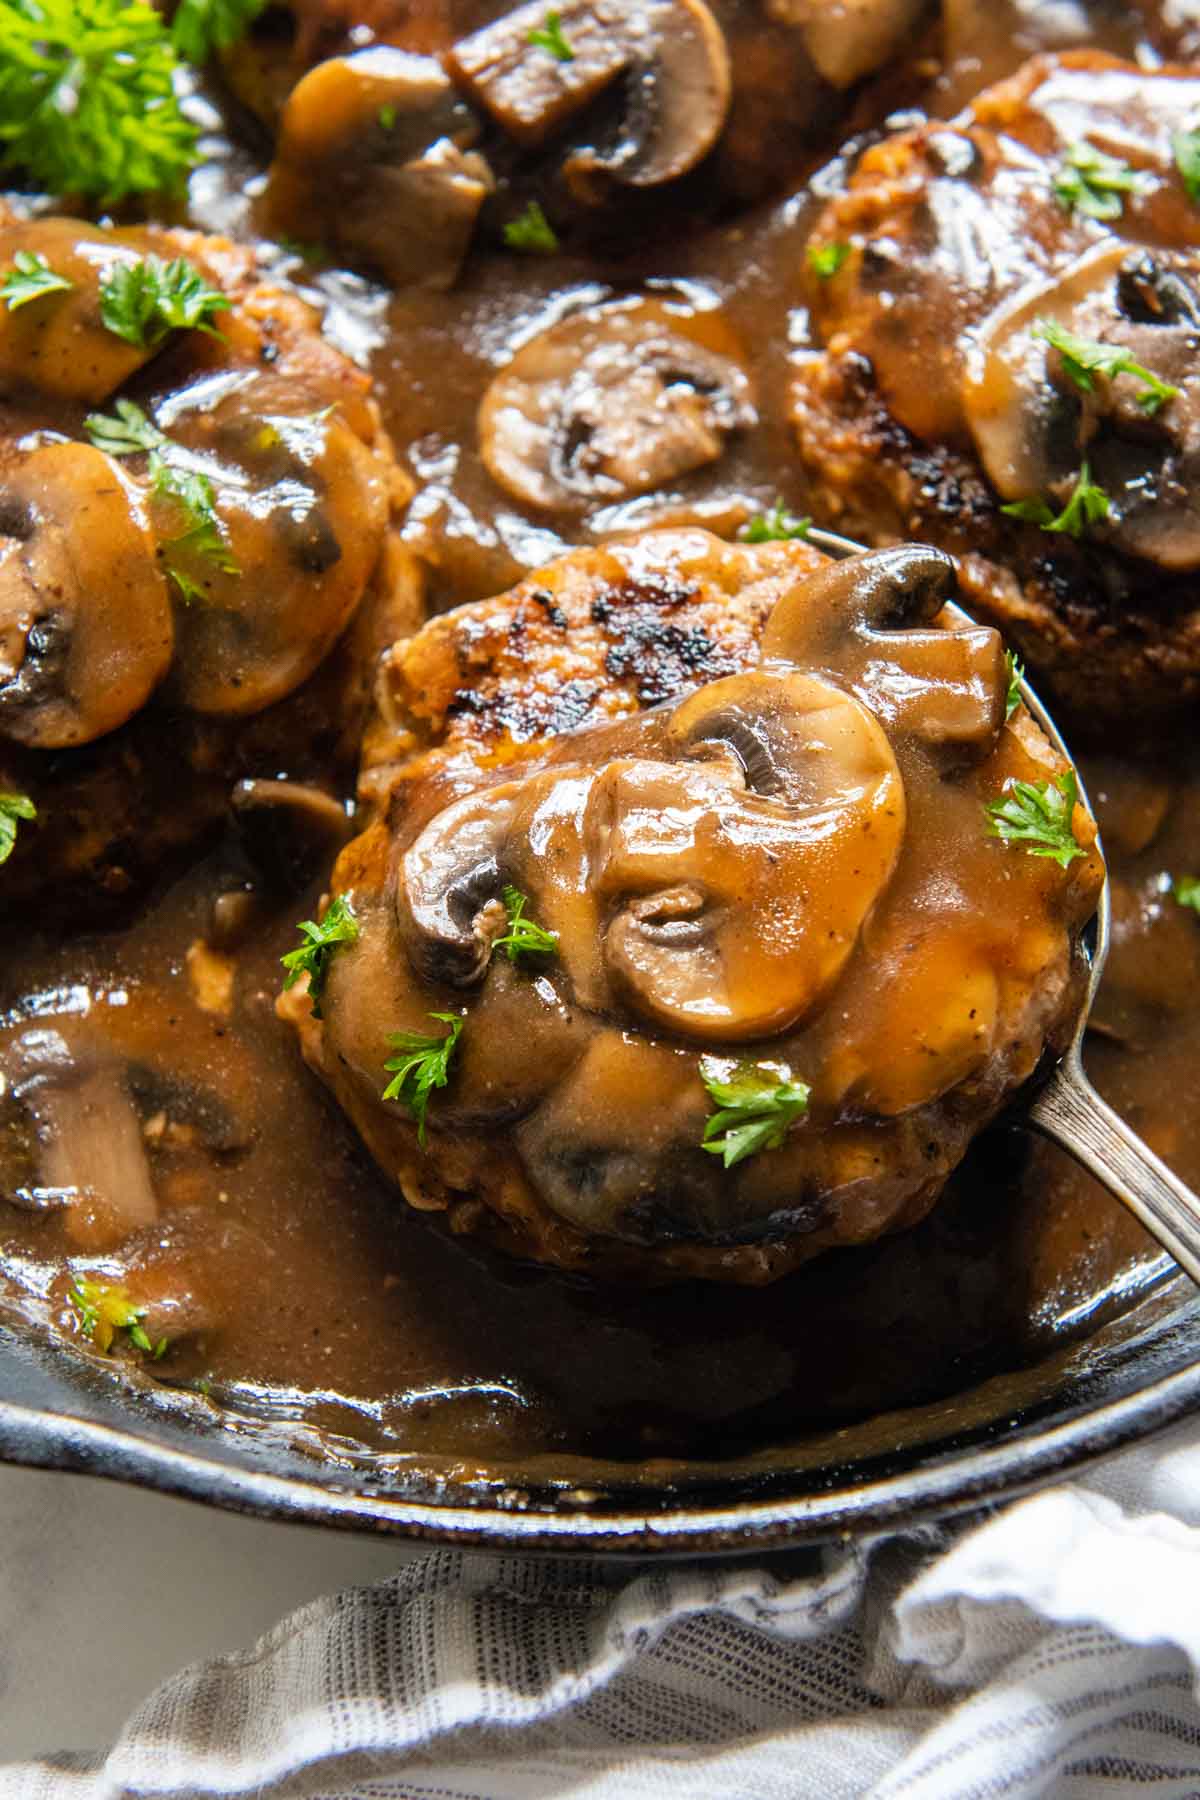 a spoon lifting up a salisbury steak with mushrooms on top from a skillet.